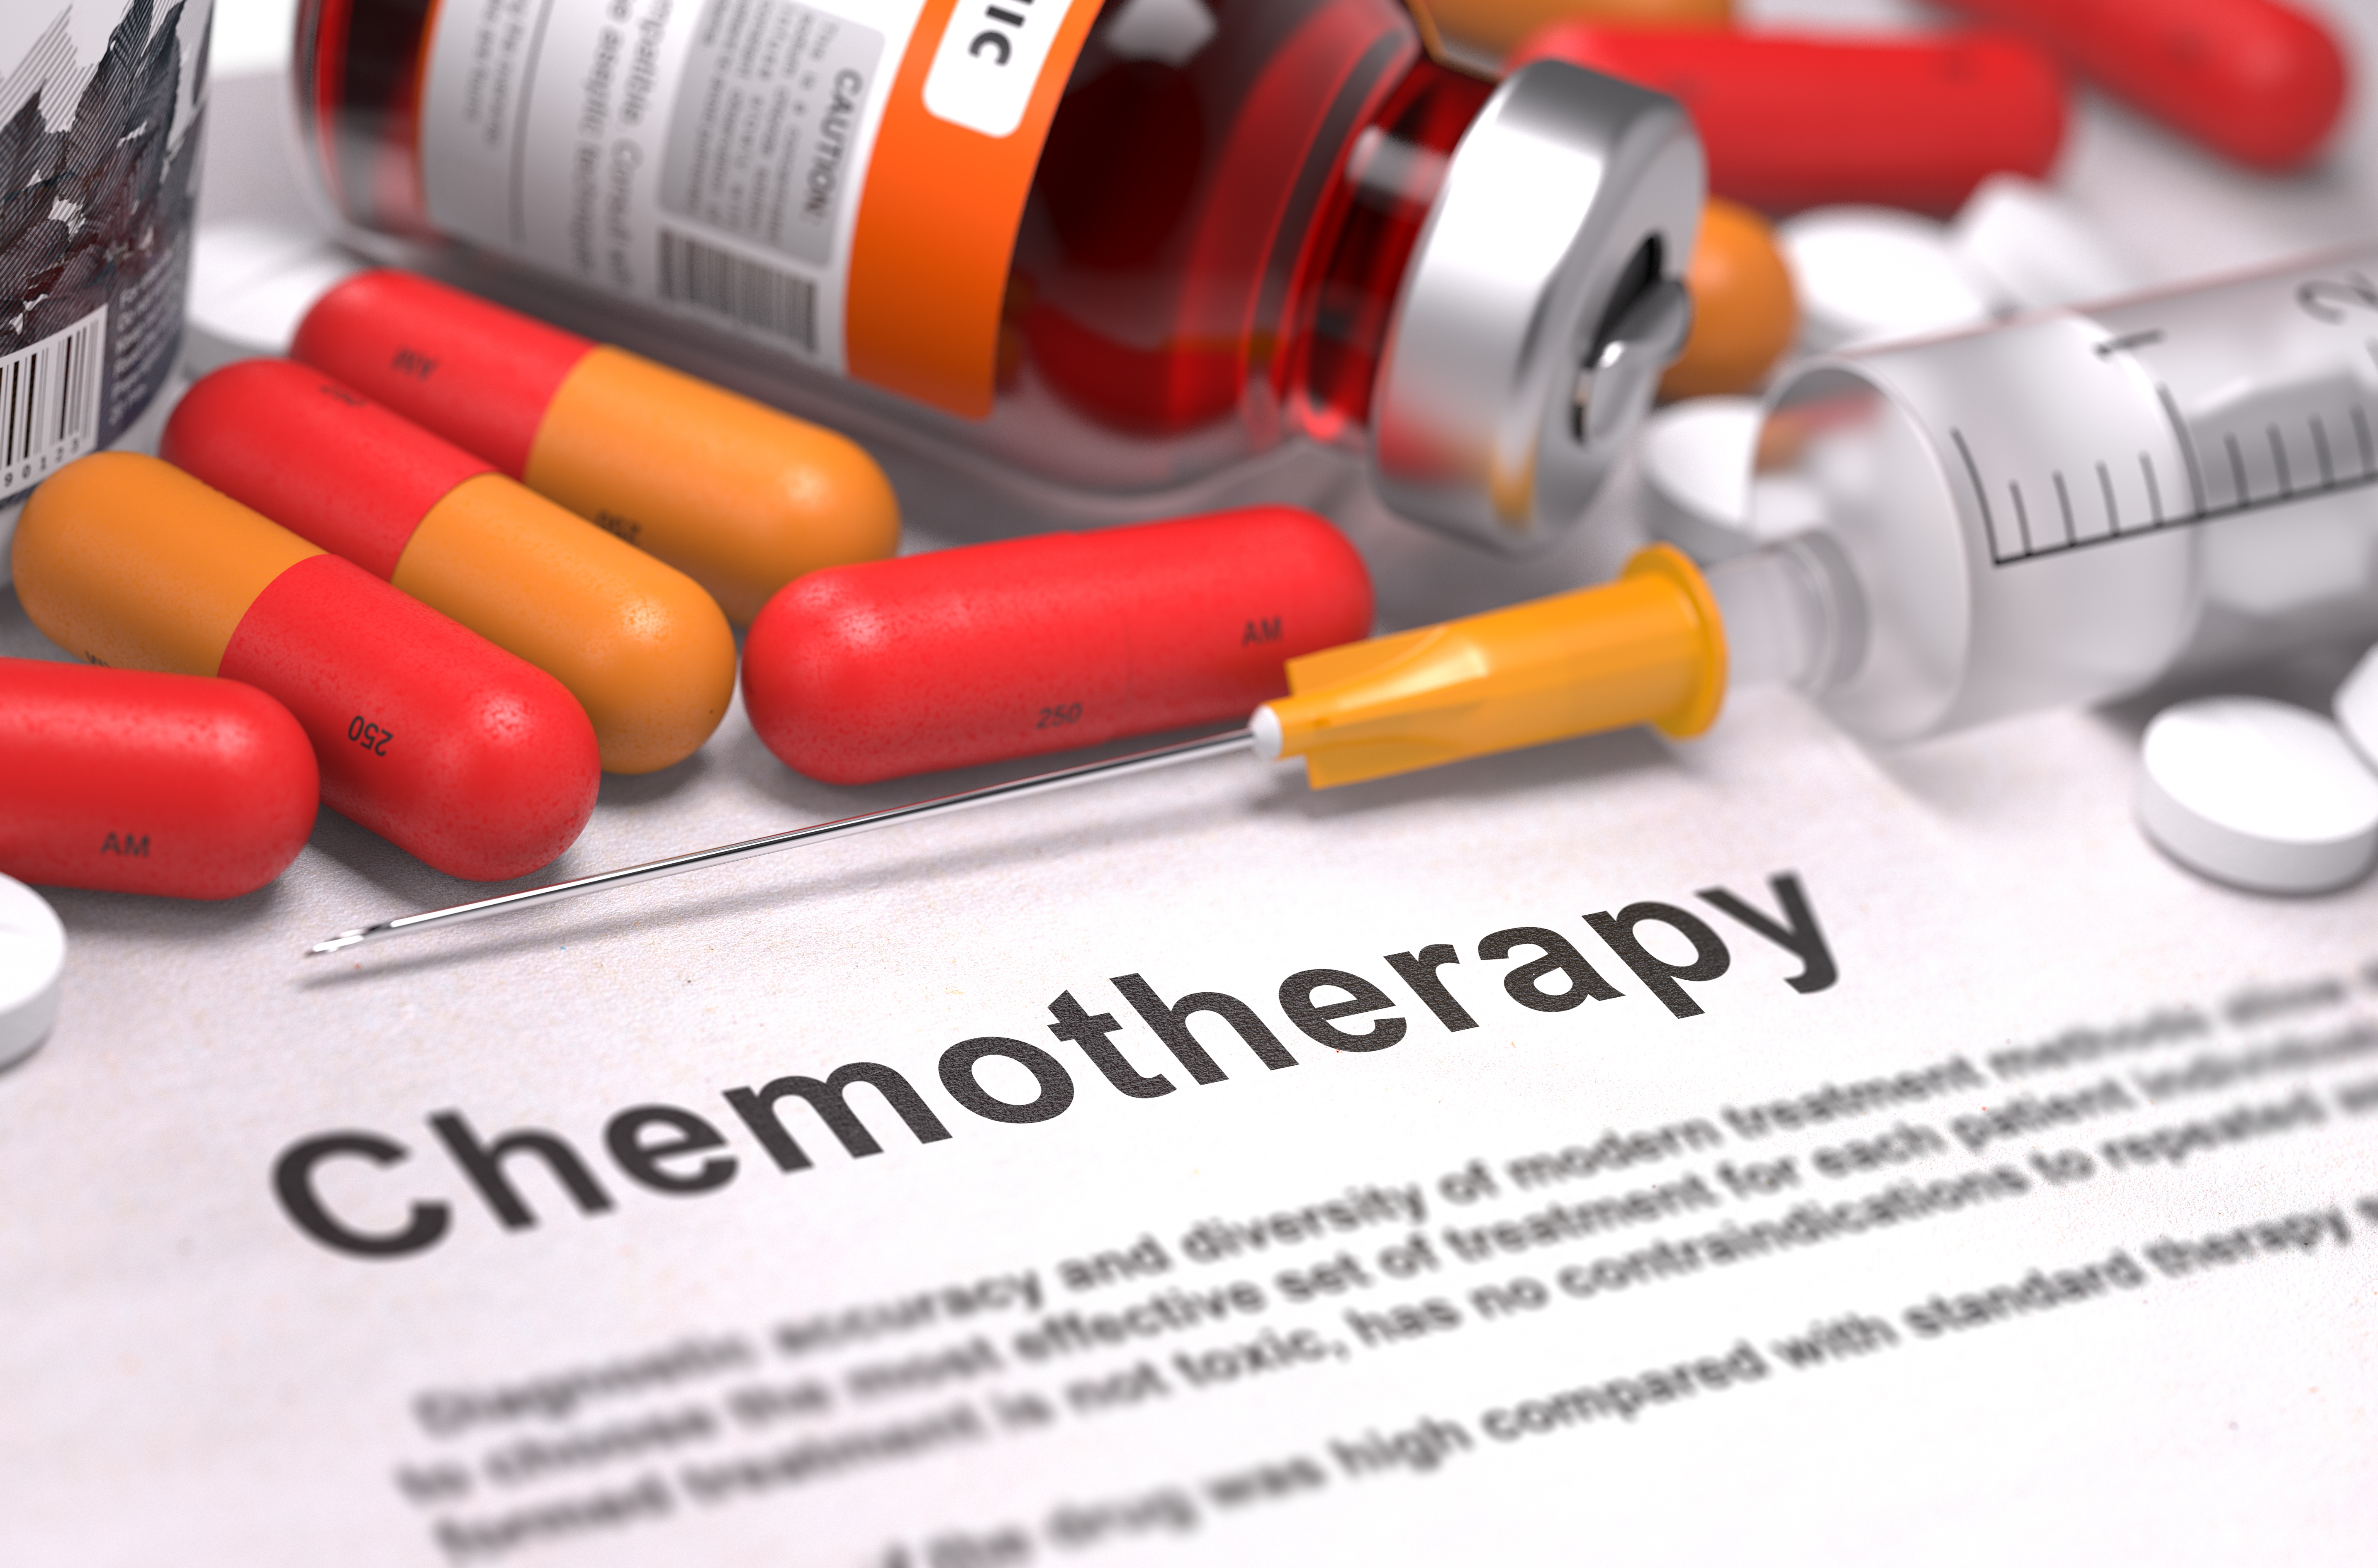 Chemotherapy and cancer drugs